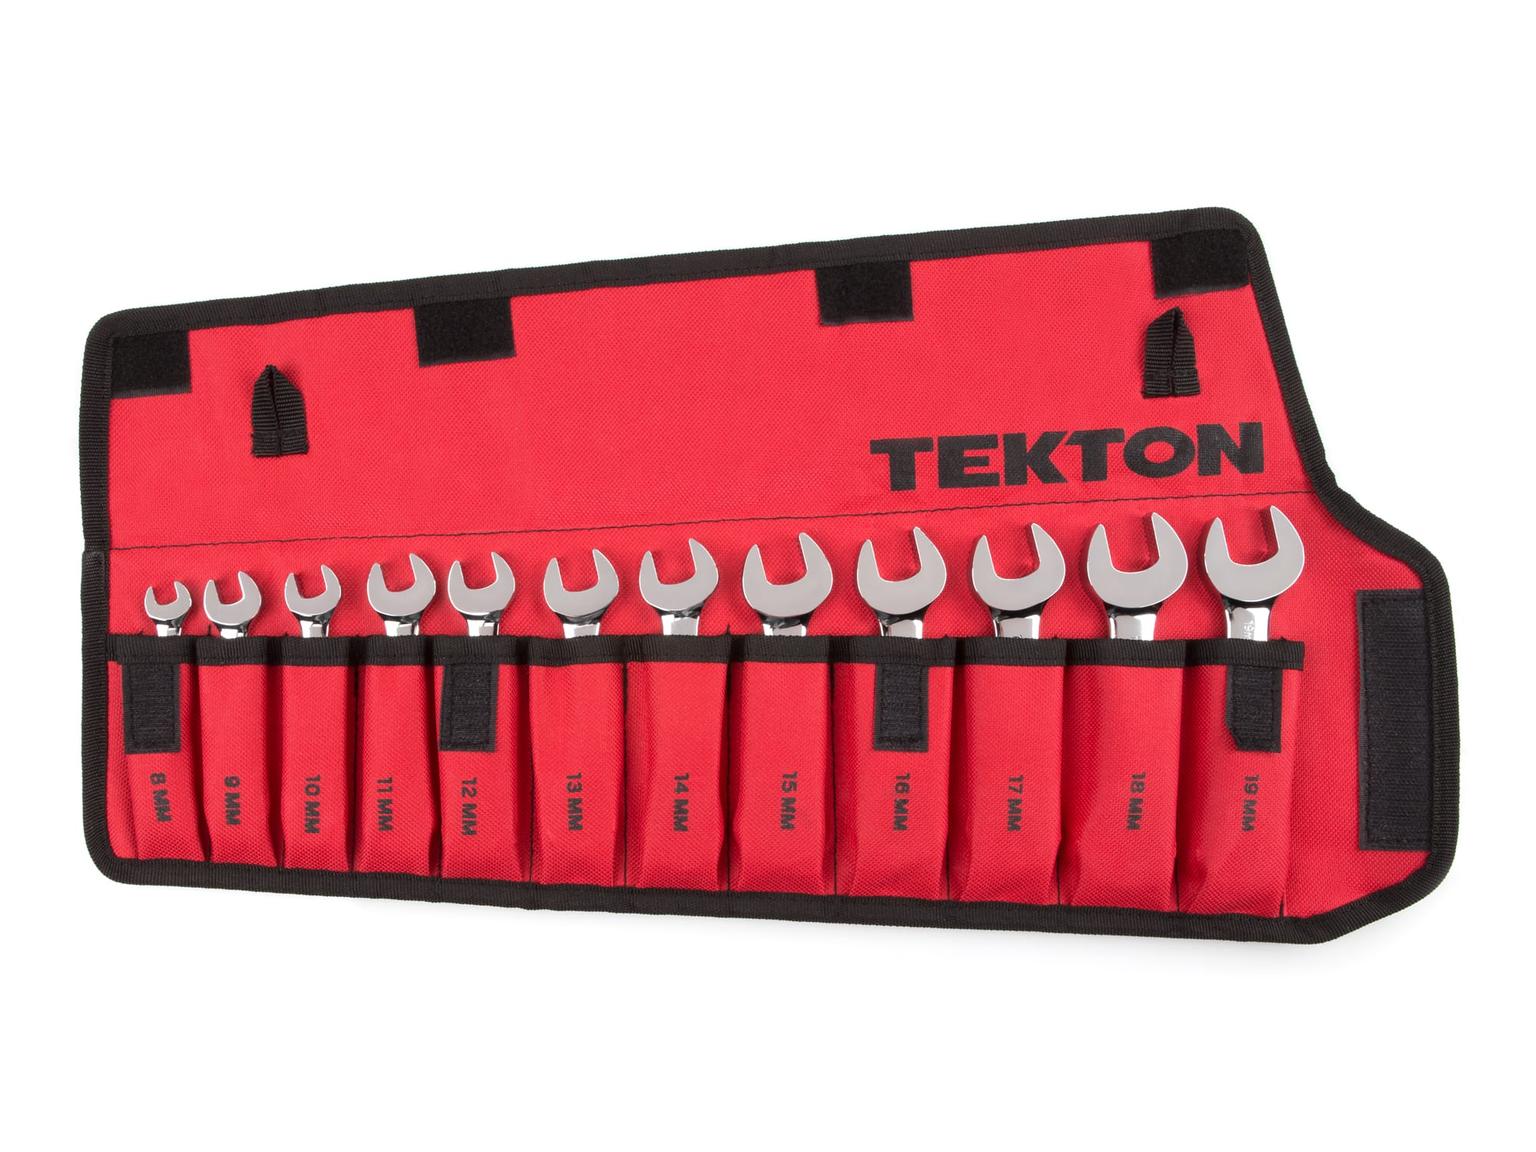 TEKTON WRN50190-T Stubby Ratcheting Combination Wrench Set with Pouch, 12-Piece (8-19 mm)